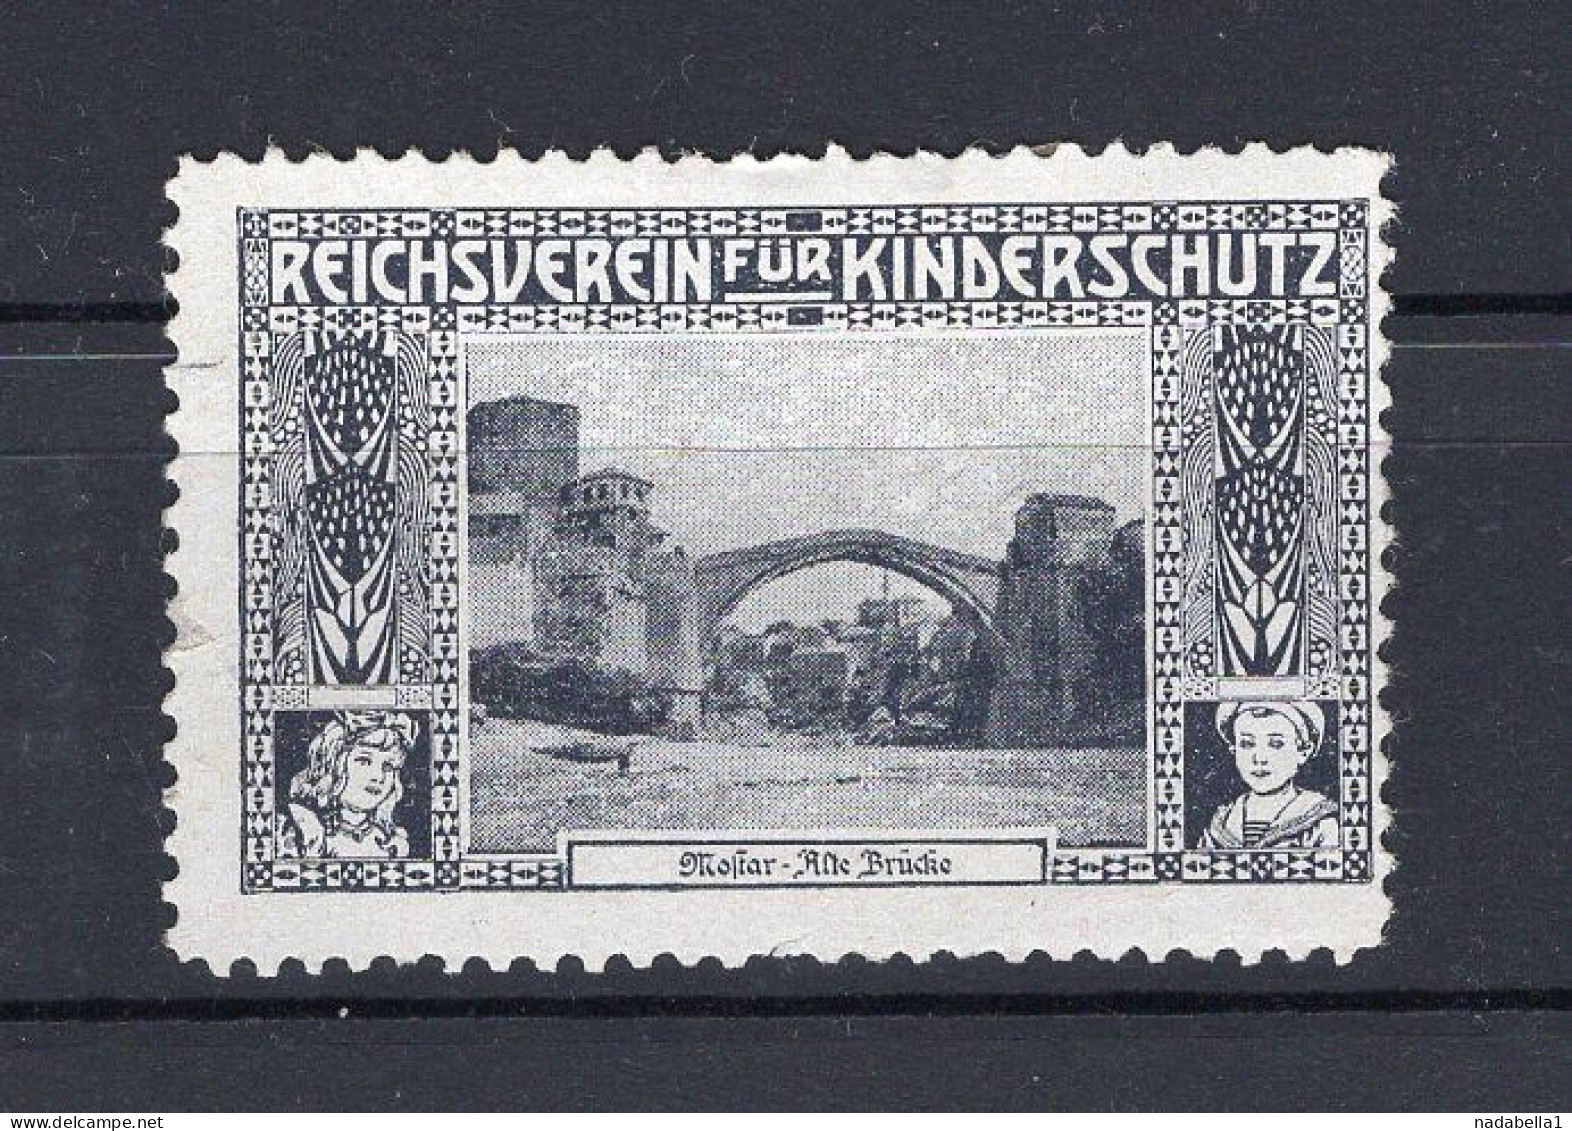 1900? AUSTRIA,HUNGARY EMPIRE,BOSNIA,REICH ASSOCIATION FOR CHILD PROTECTION ADDITIONAL STAMP,MOSTAR OLD BRIDGE - Nuovi